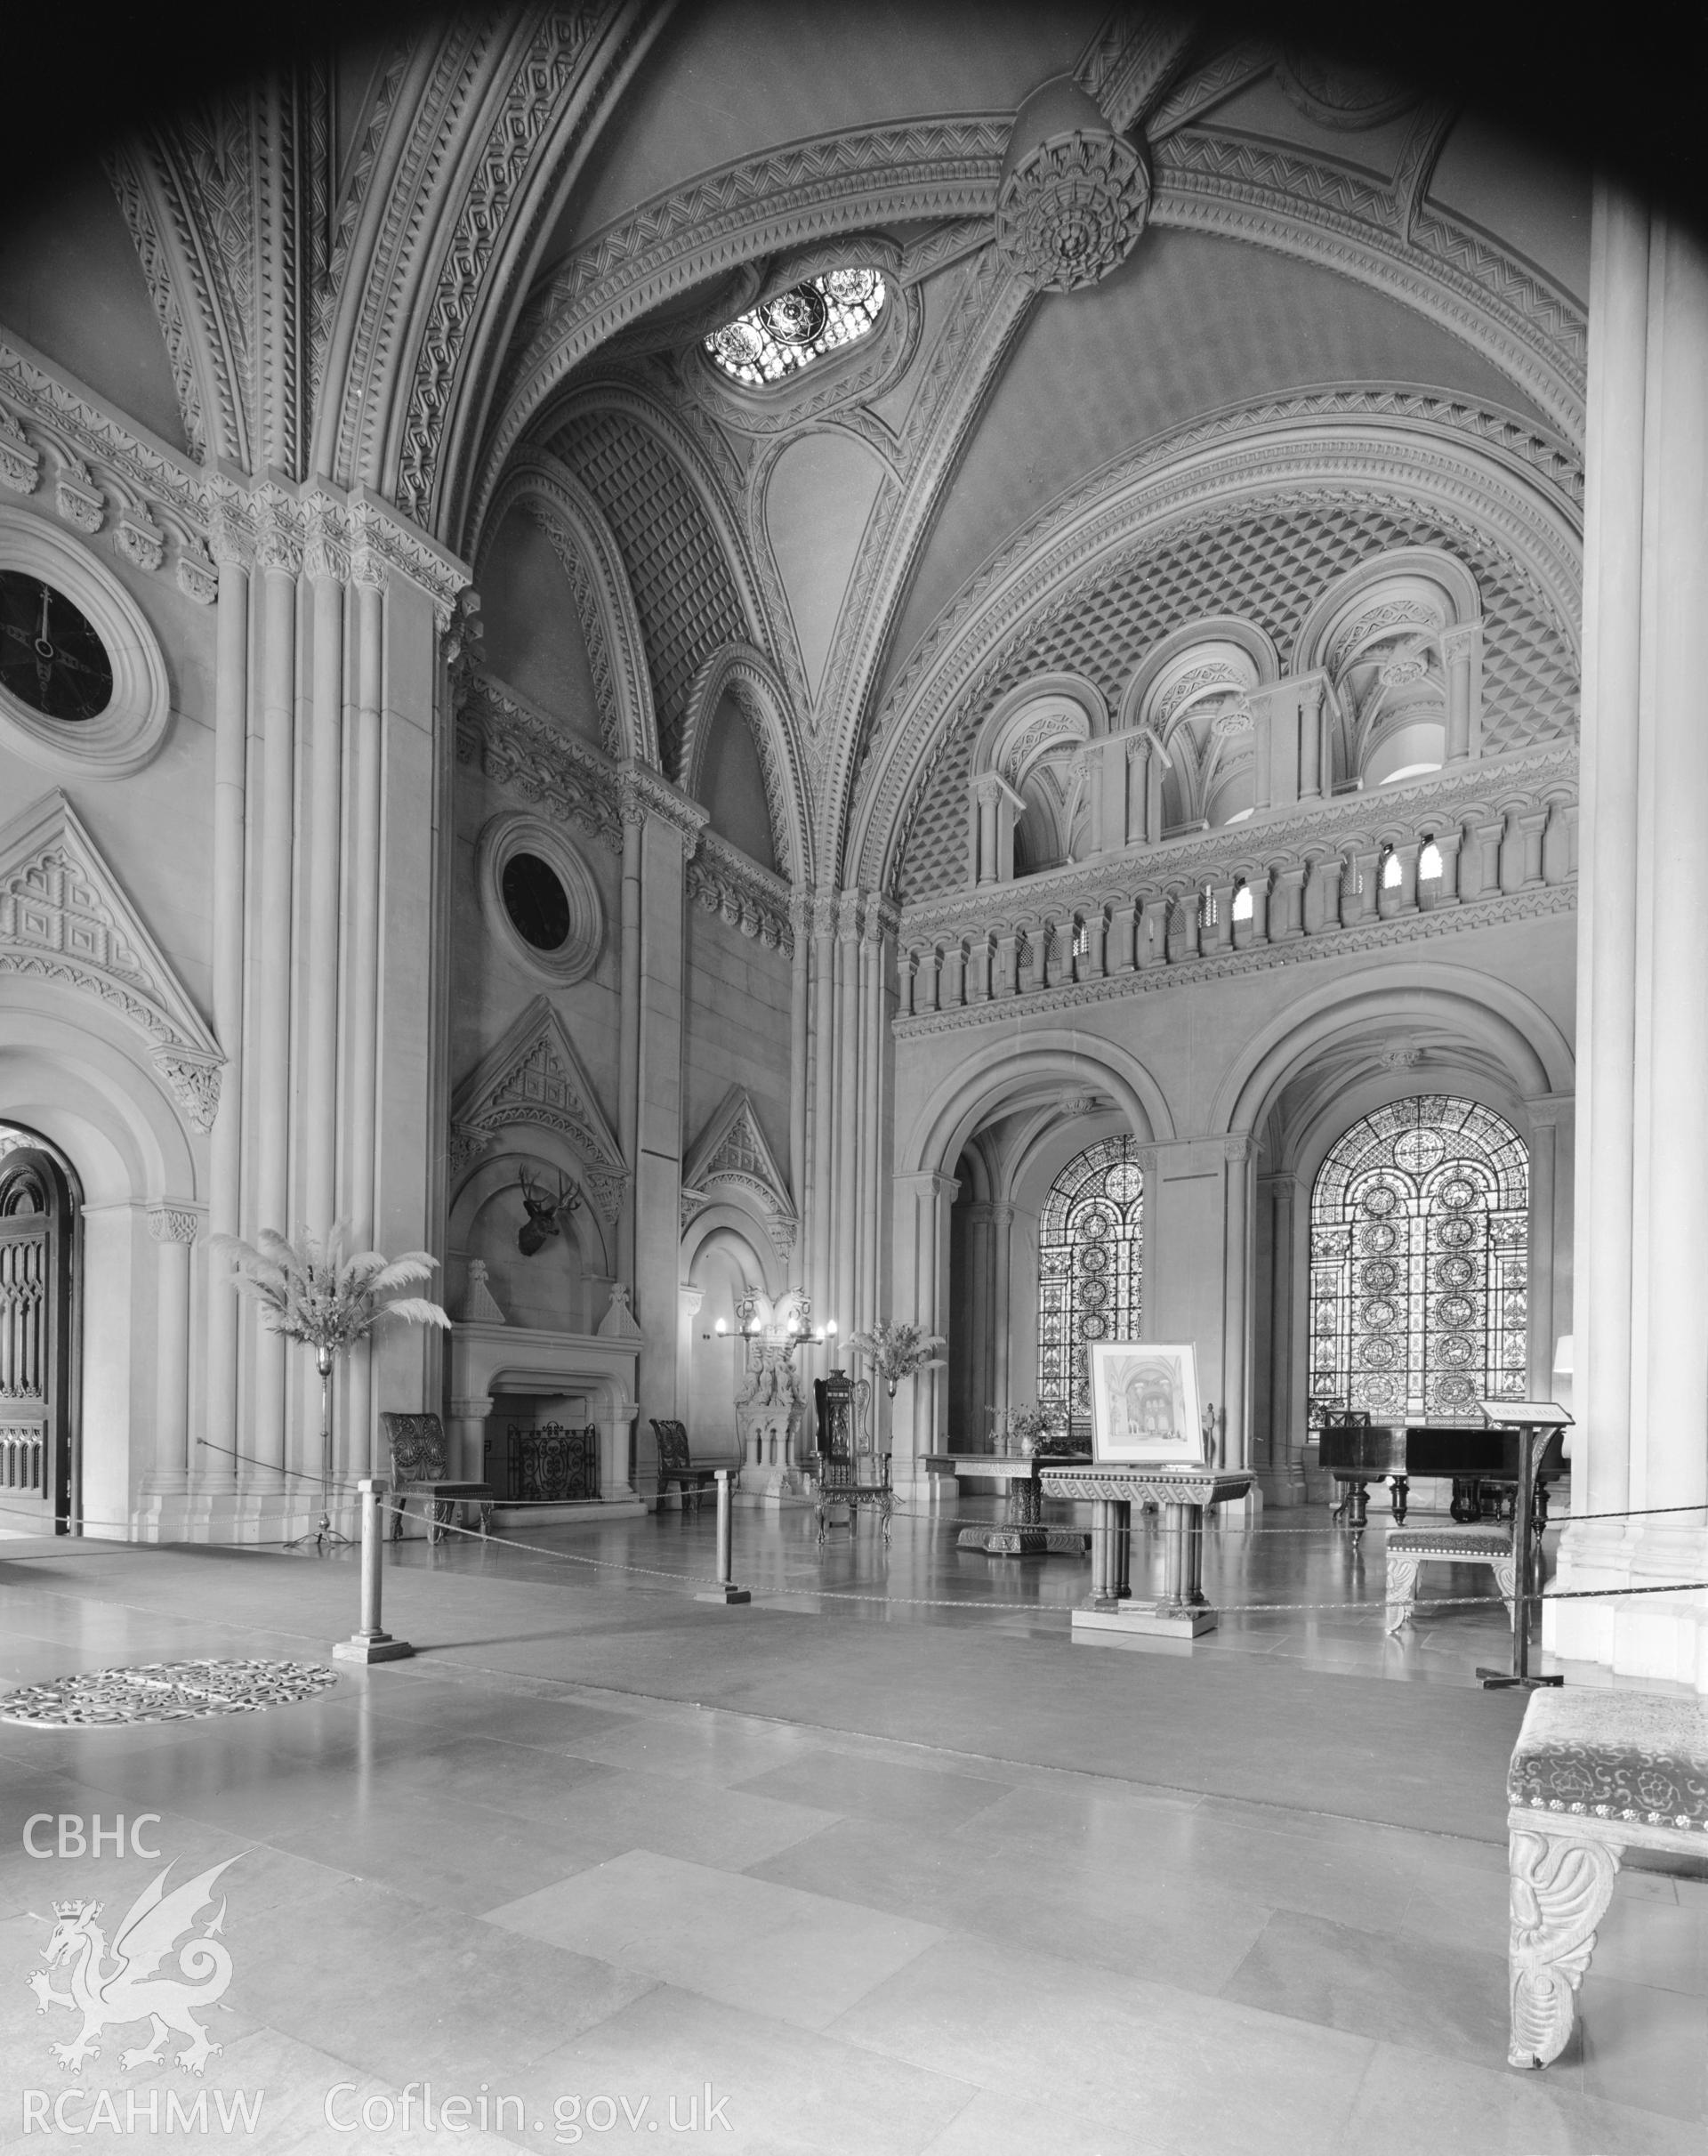 Interior view showing the Great Hall